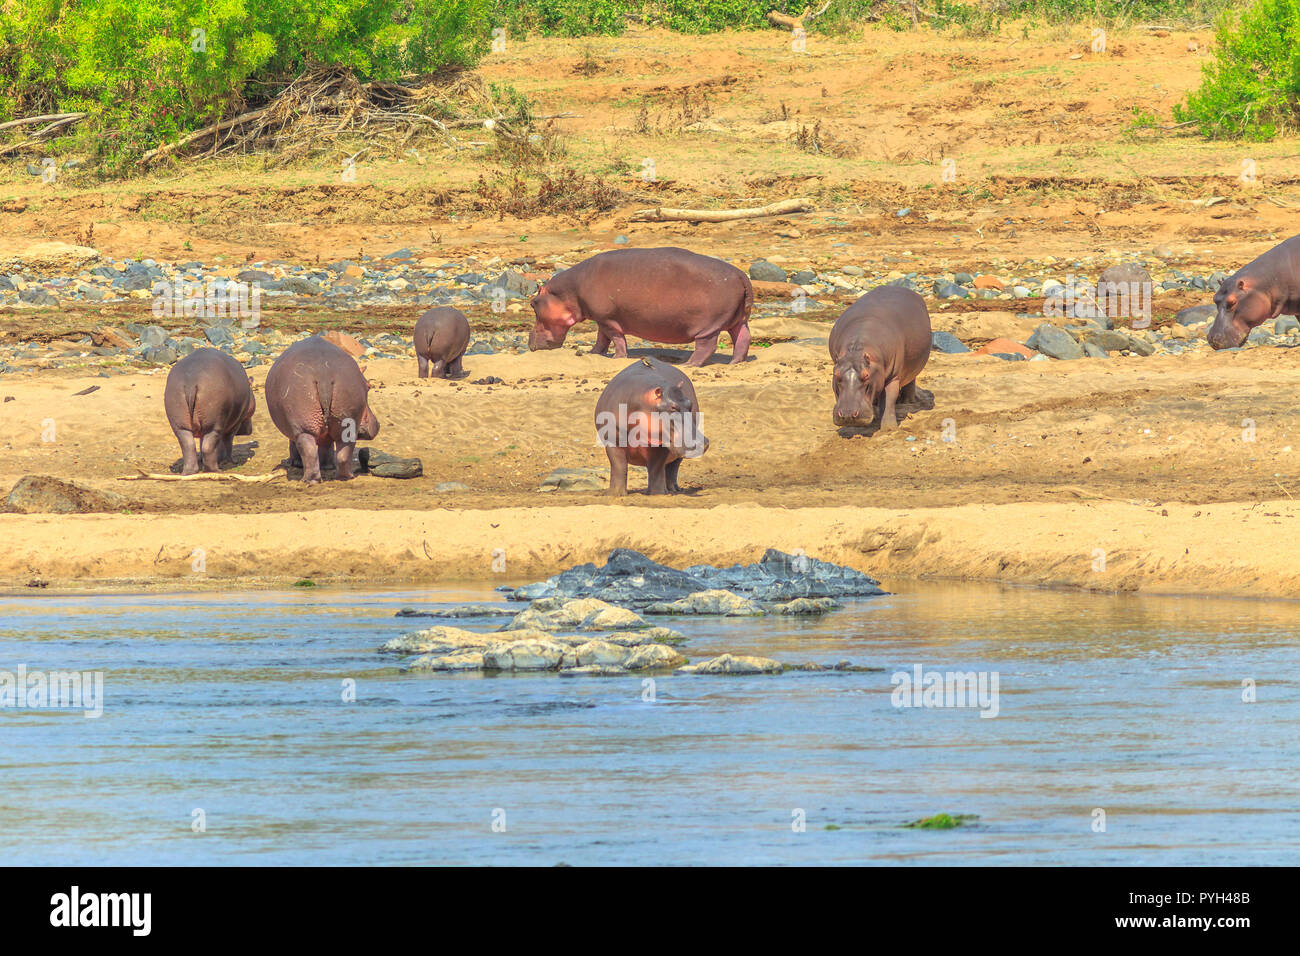 Group of Cape hippopotamus or South African hippopotamus at Olifants River in Kruger National Park, South Africa. Stock Photo